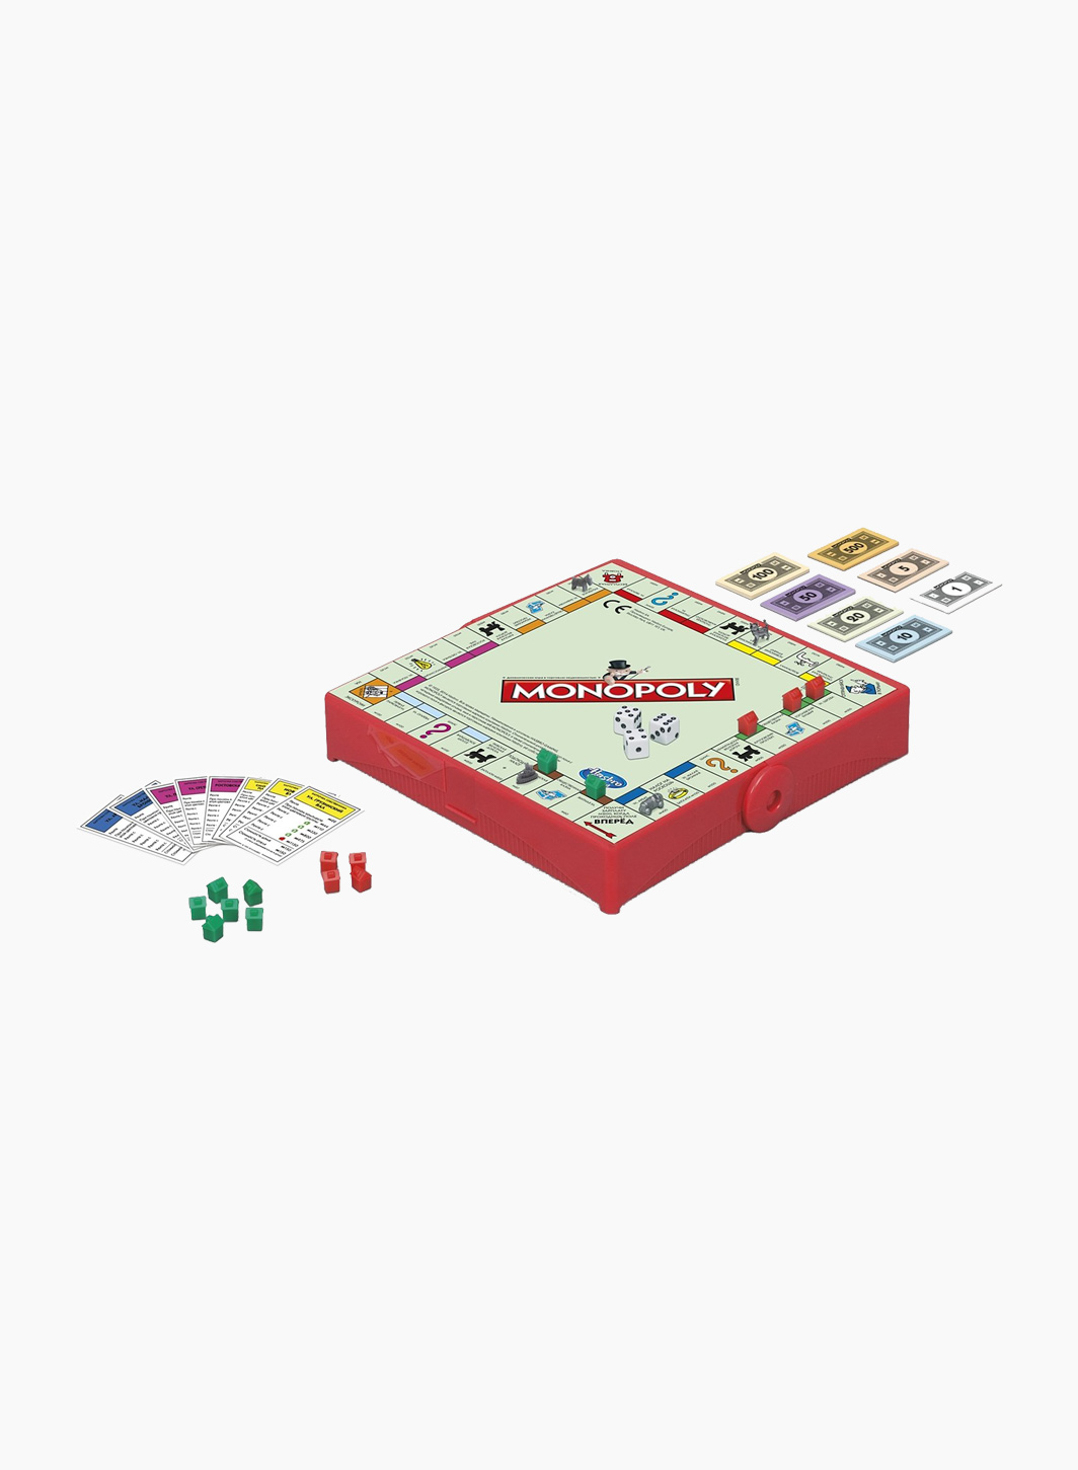 Hasbro Board Game GRAB AND GO Monopoly